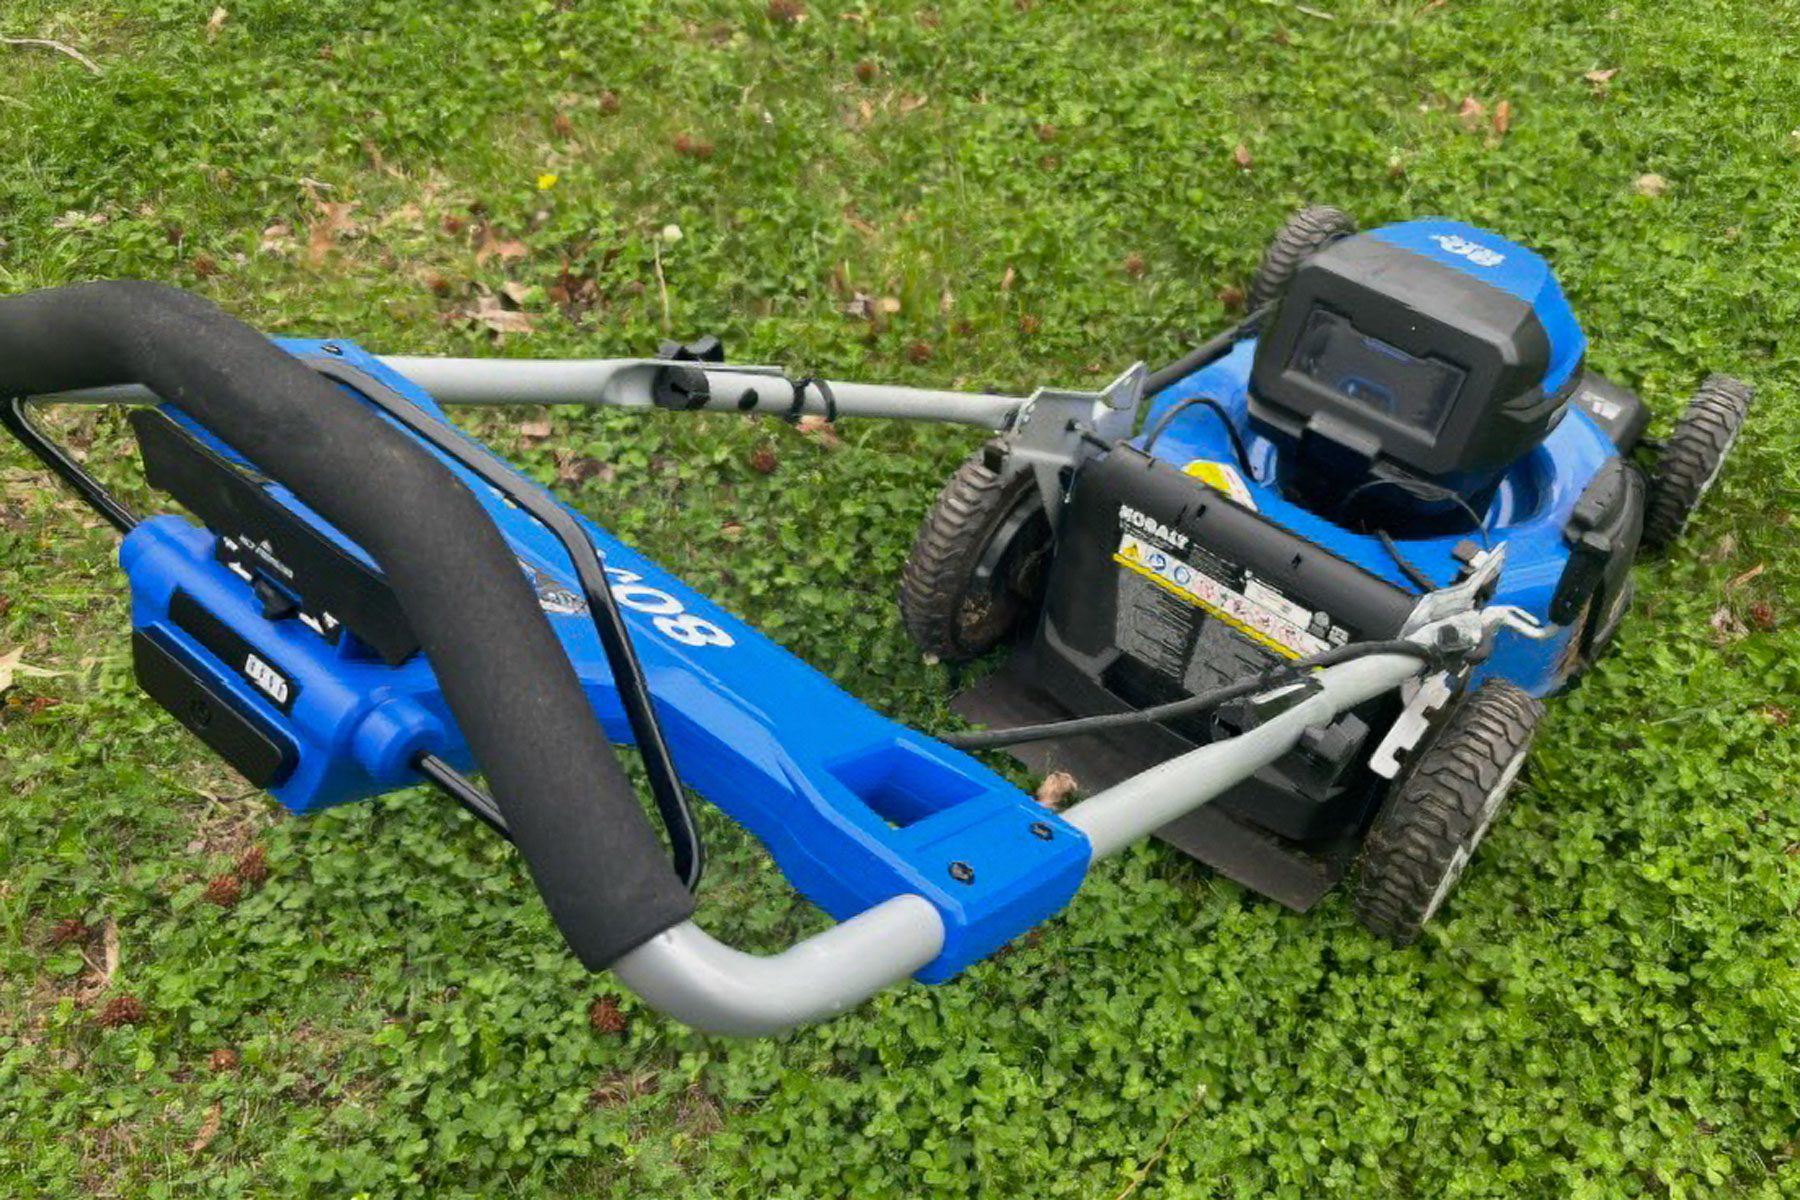 Kolbalt Electric Mower power switch and other features.